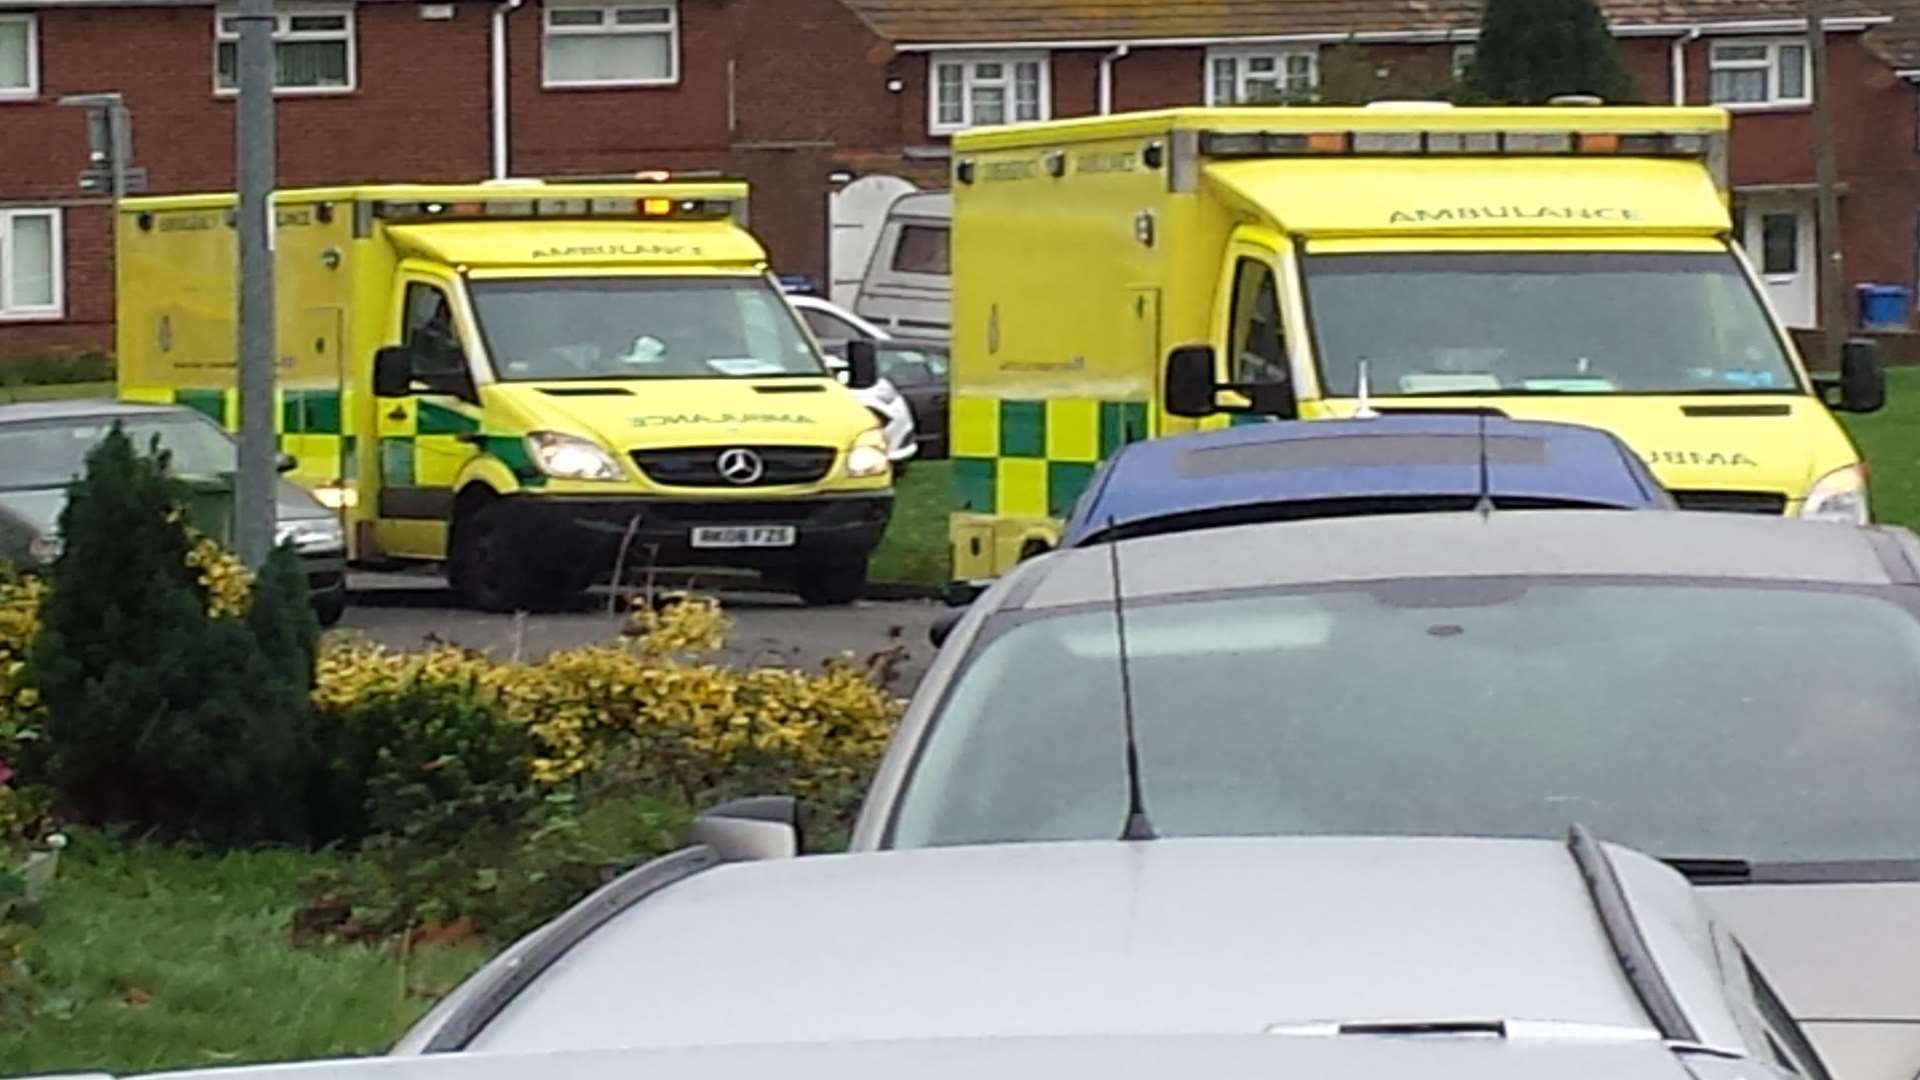 Ambulances at the scene of the incident in Rectory Road, Sittingbourne